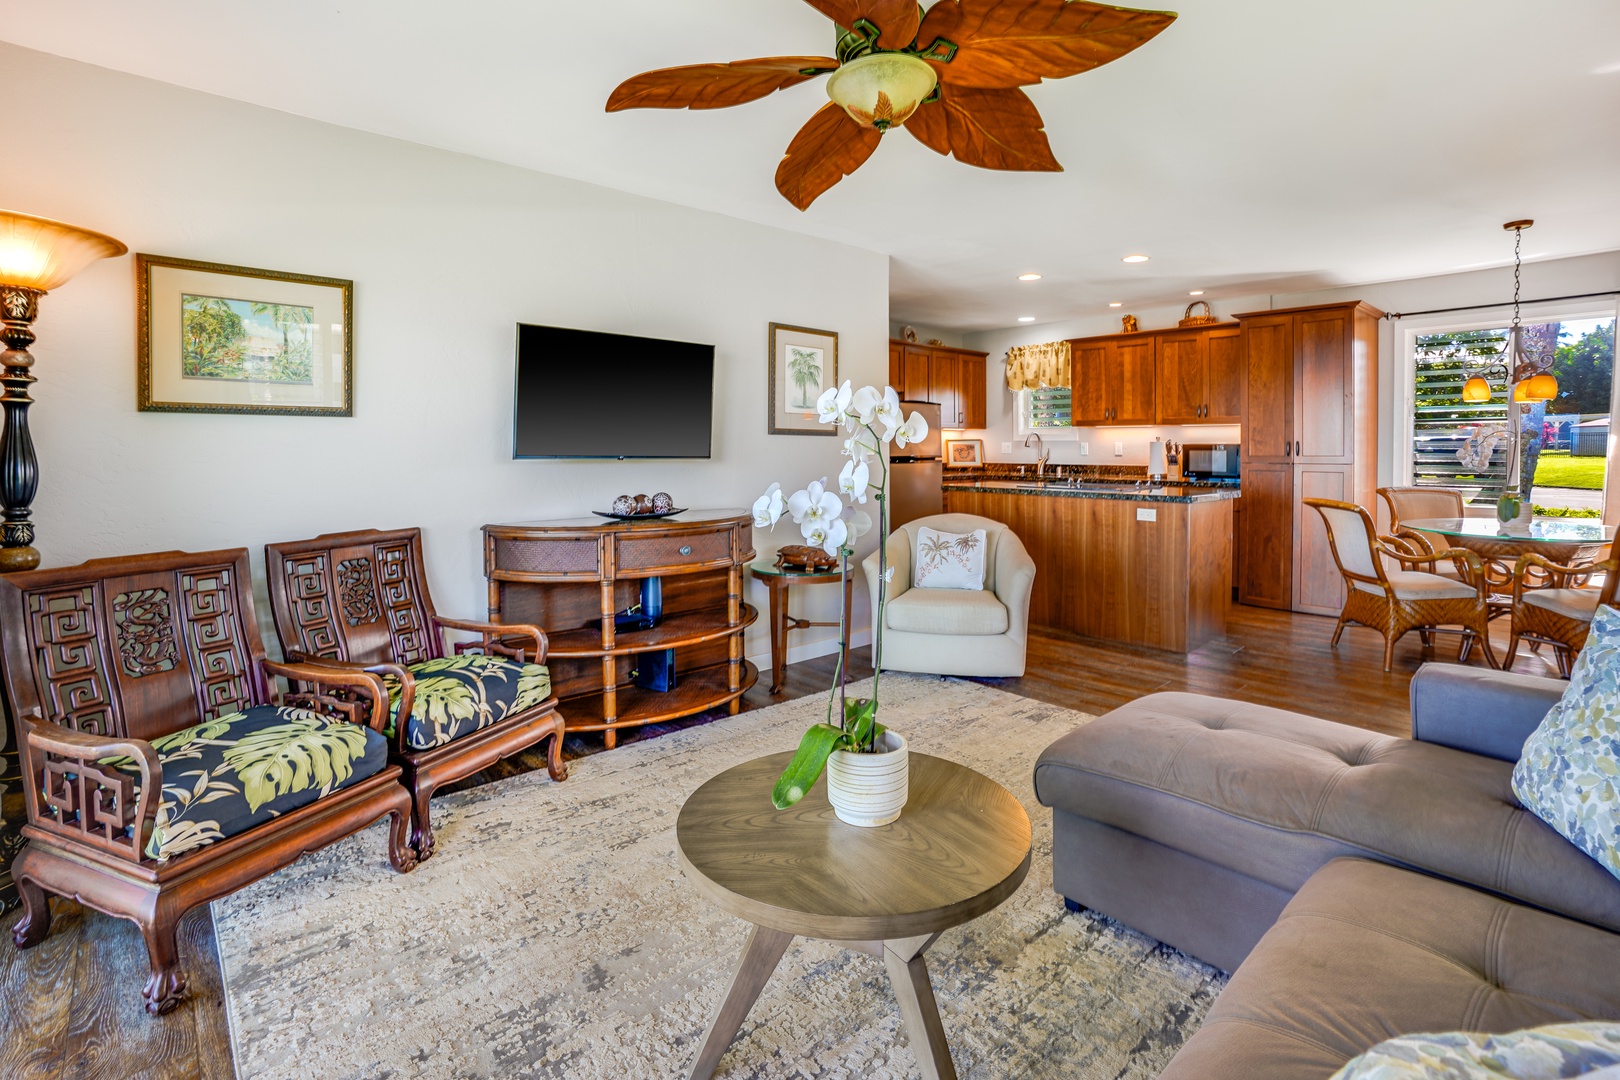 Princeville Vacation Rentals, Alii Kai 7201 - The living area offers a cool respite from the tropical warmth.